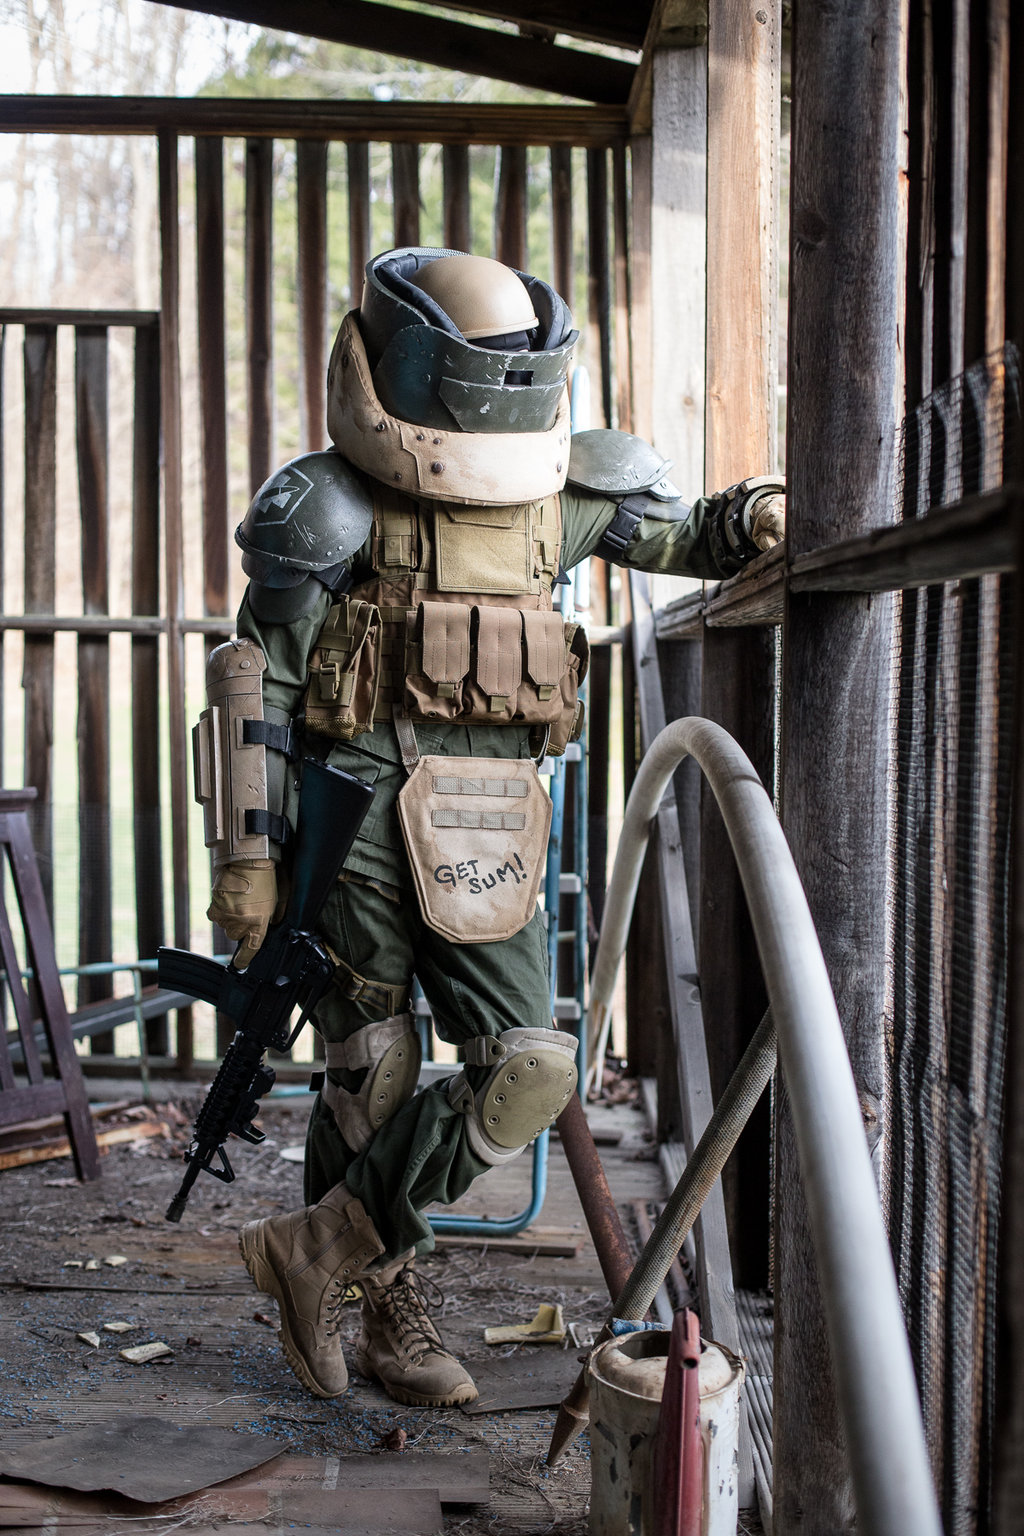 Some Big-Arse Call Of Duty Cosplay